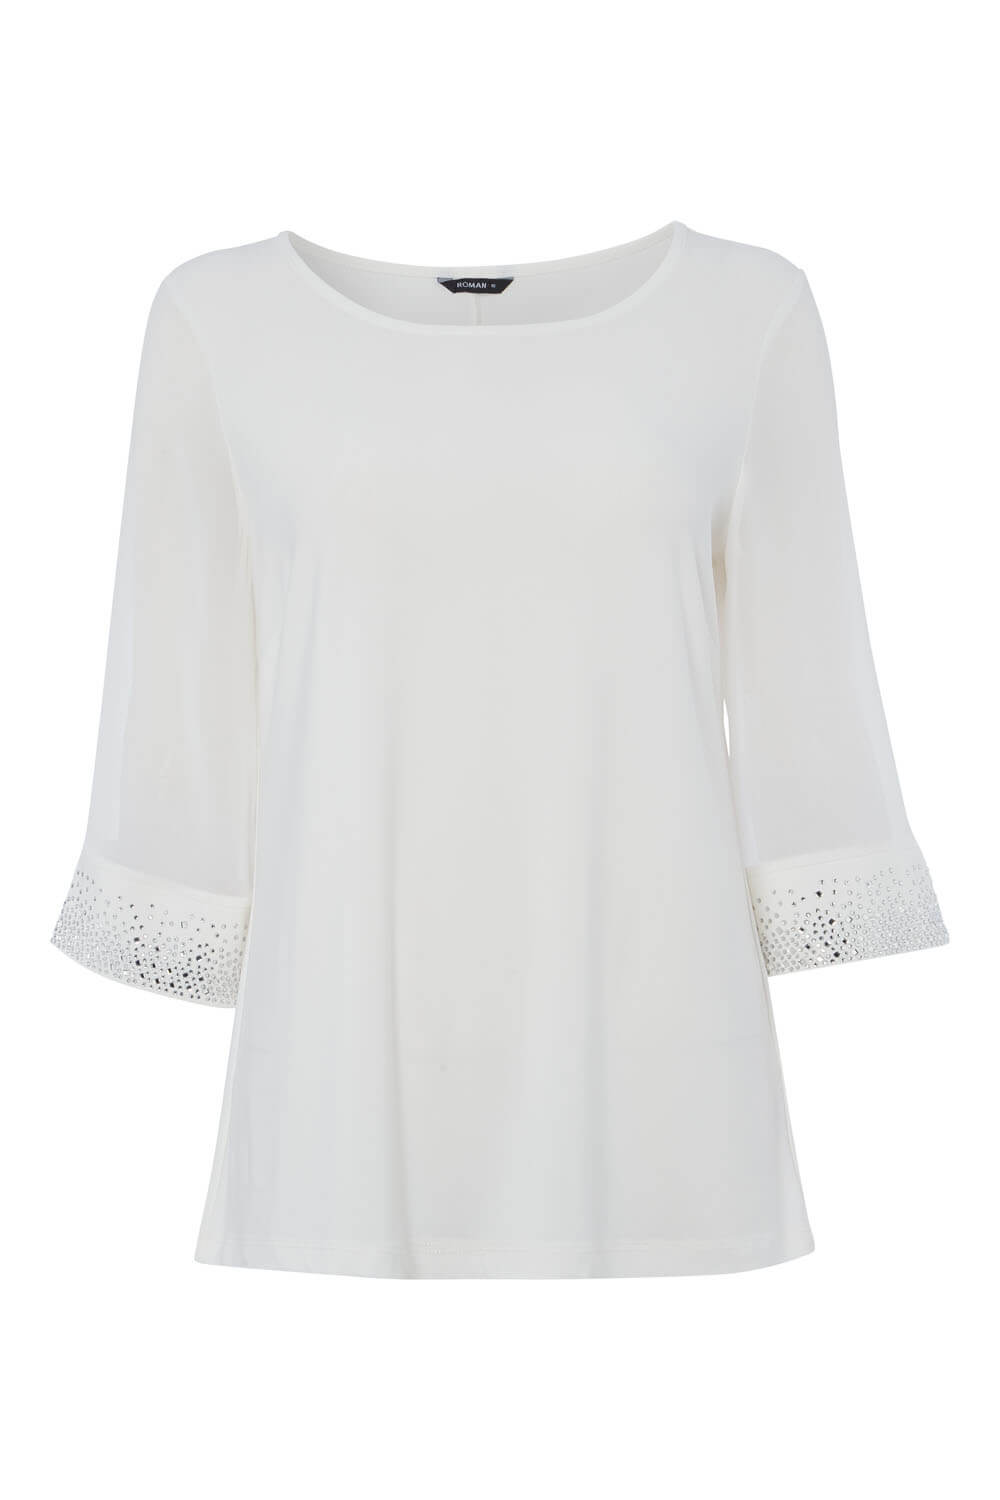 Ivory  Embellished Cuff Top, Image 5 of 5